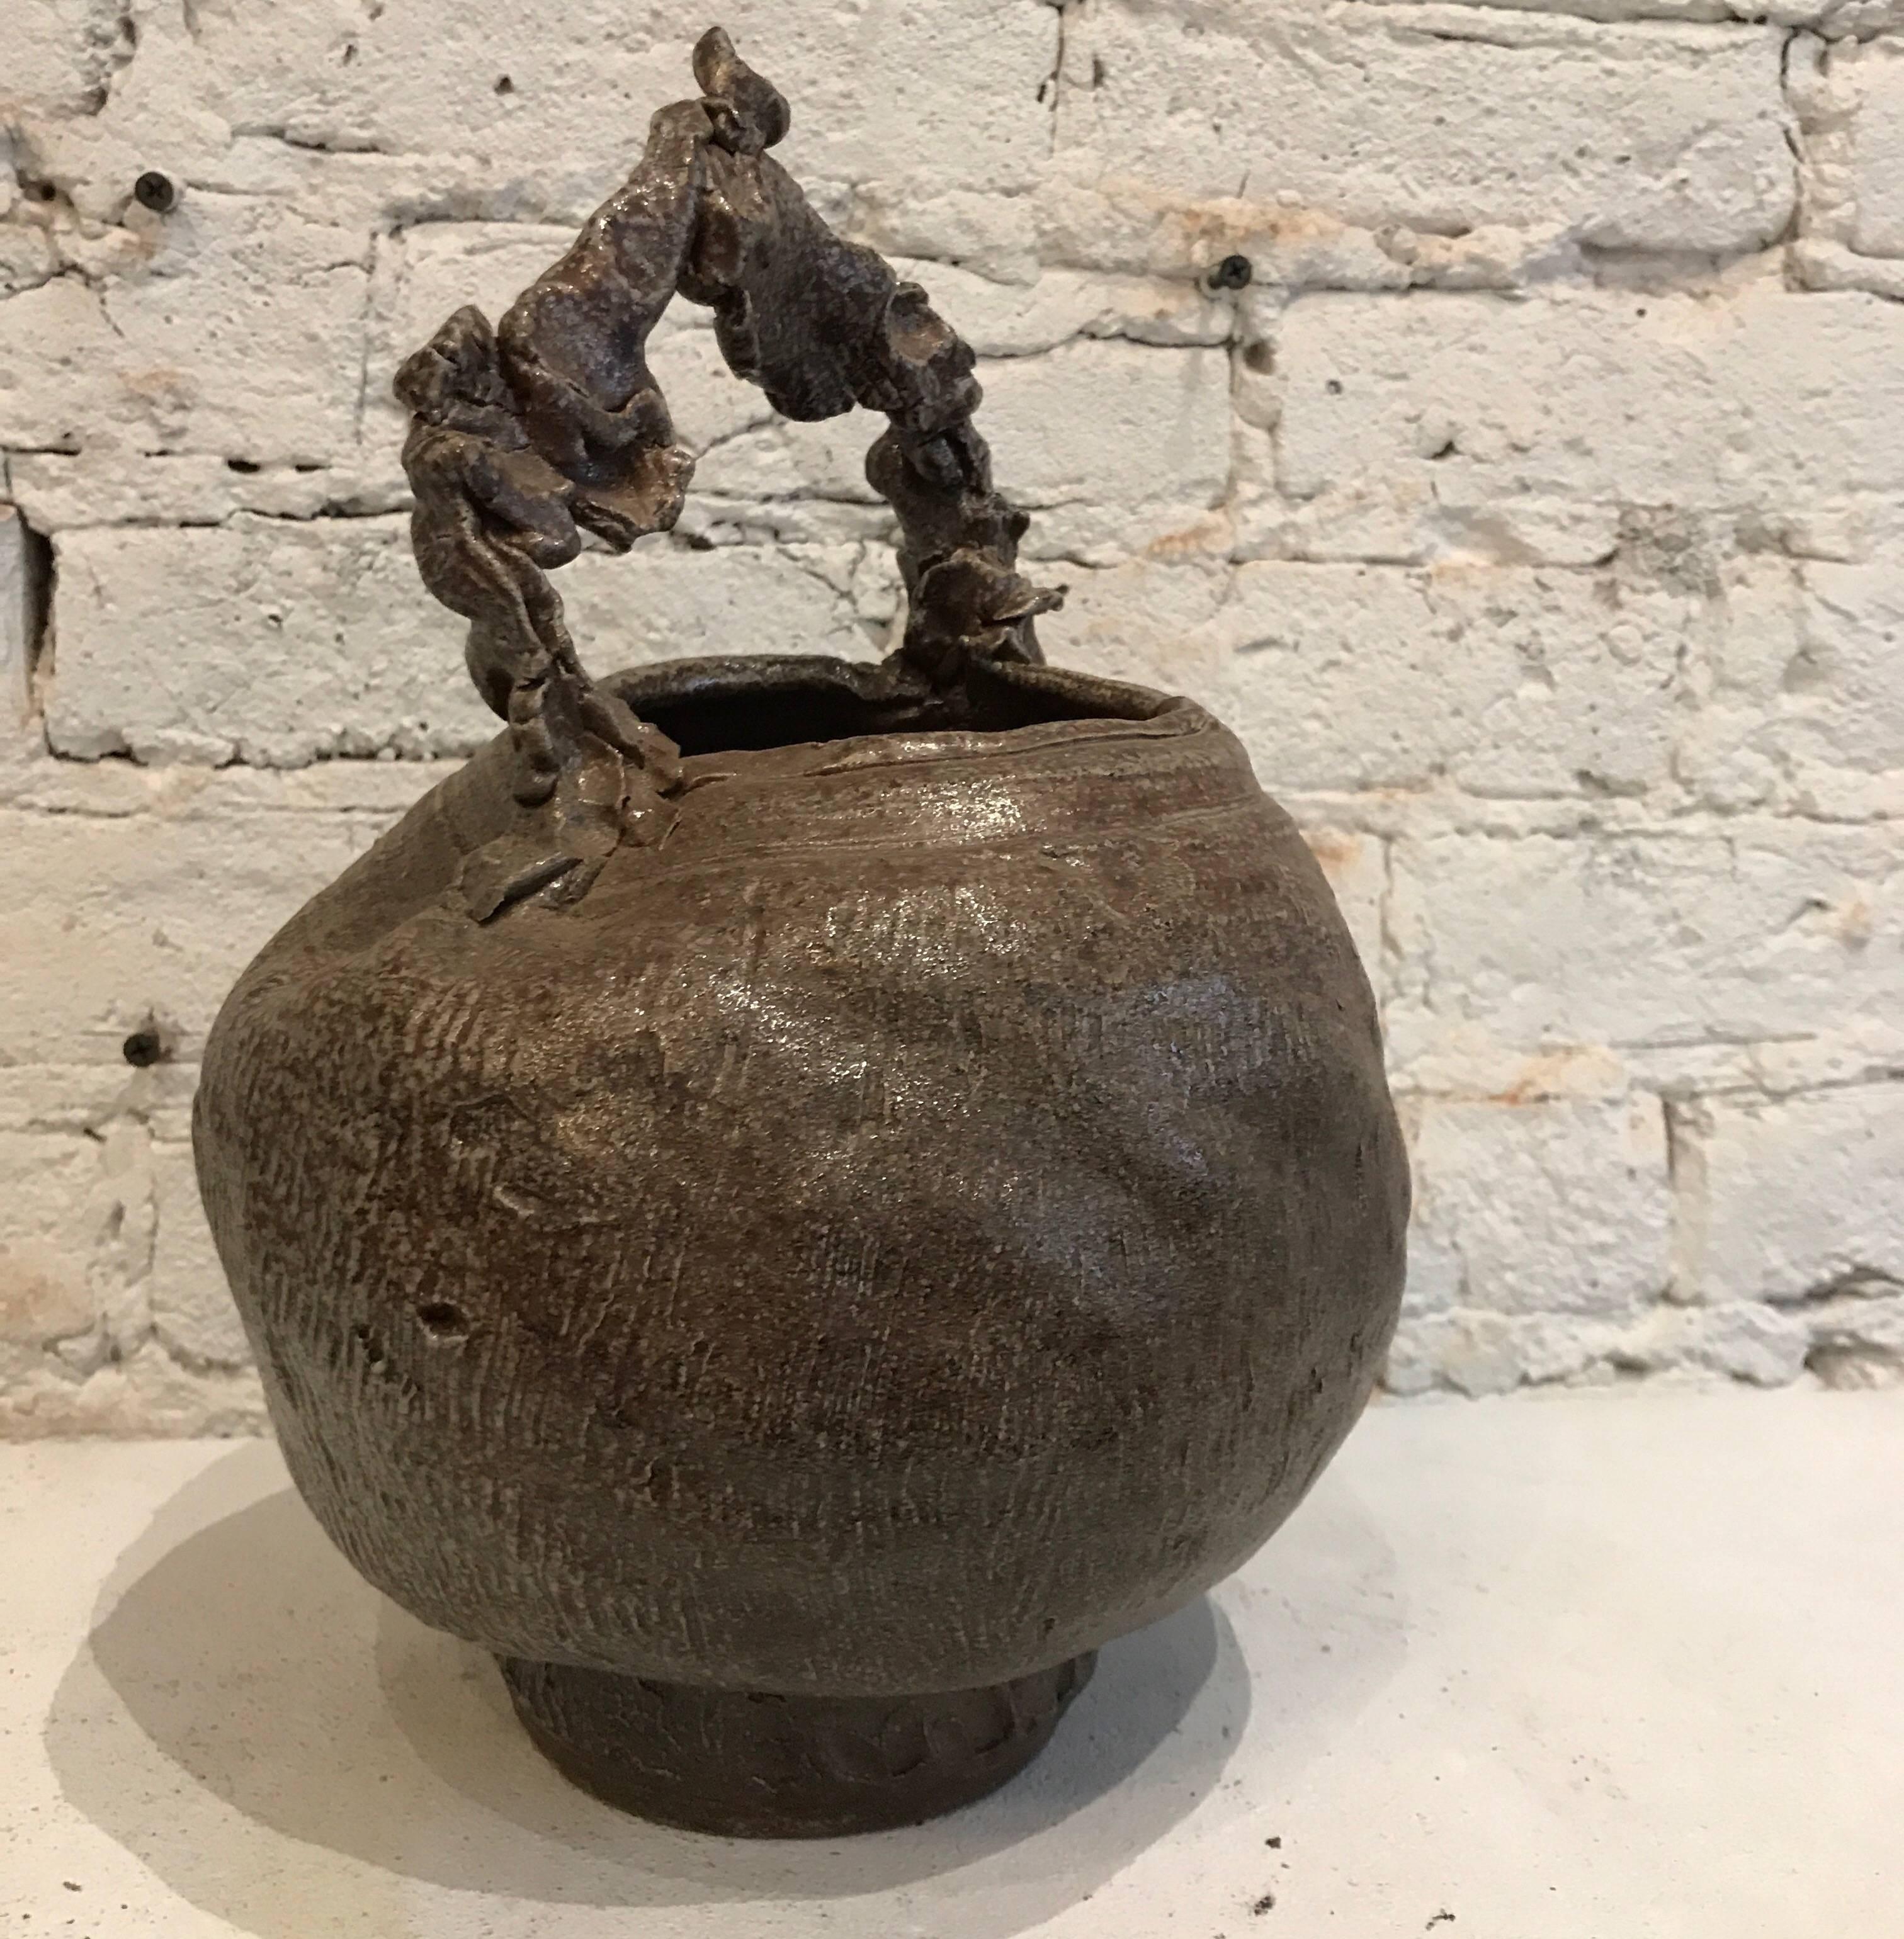 20th century rough and primitive raku handled pottery by Kelly Fuenning 
The style of this beauty of the piece is rather primitive and ancient although it is a contemporary piece 



Measures: 7.25 inch D x 7.75 inch W x 10.5 inch H
Bowl: 6.5